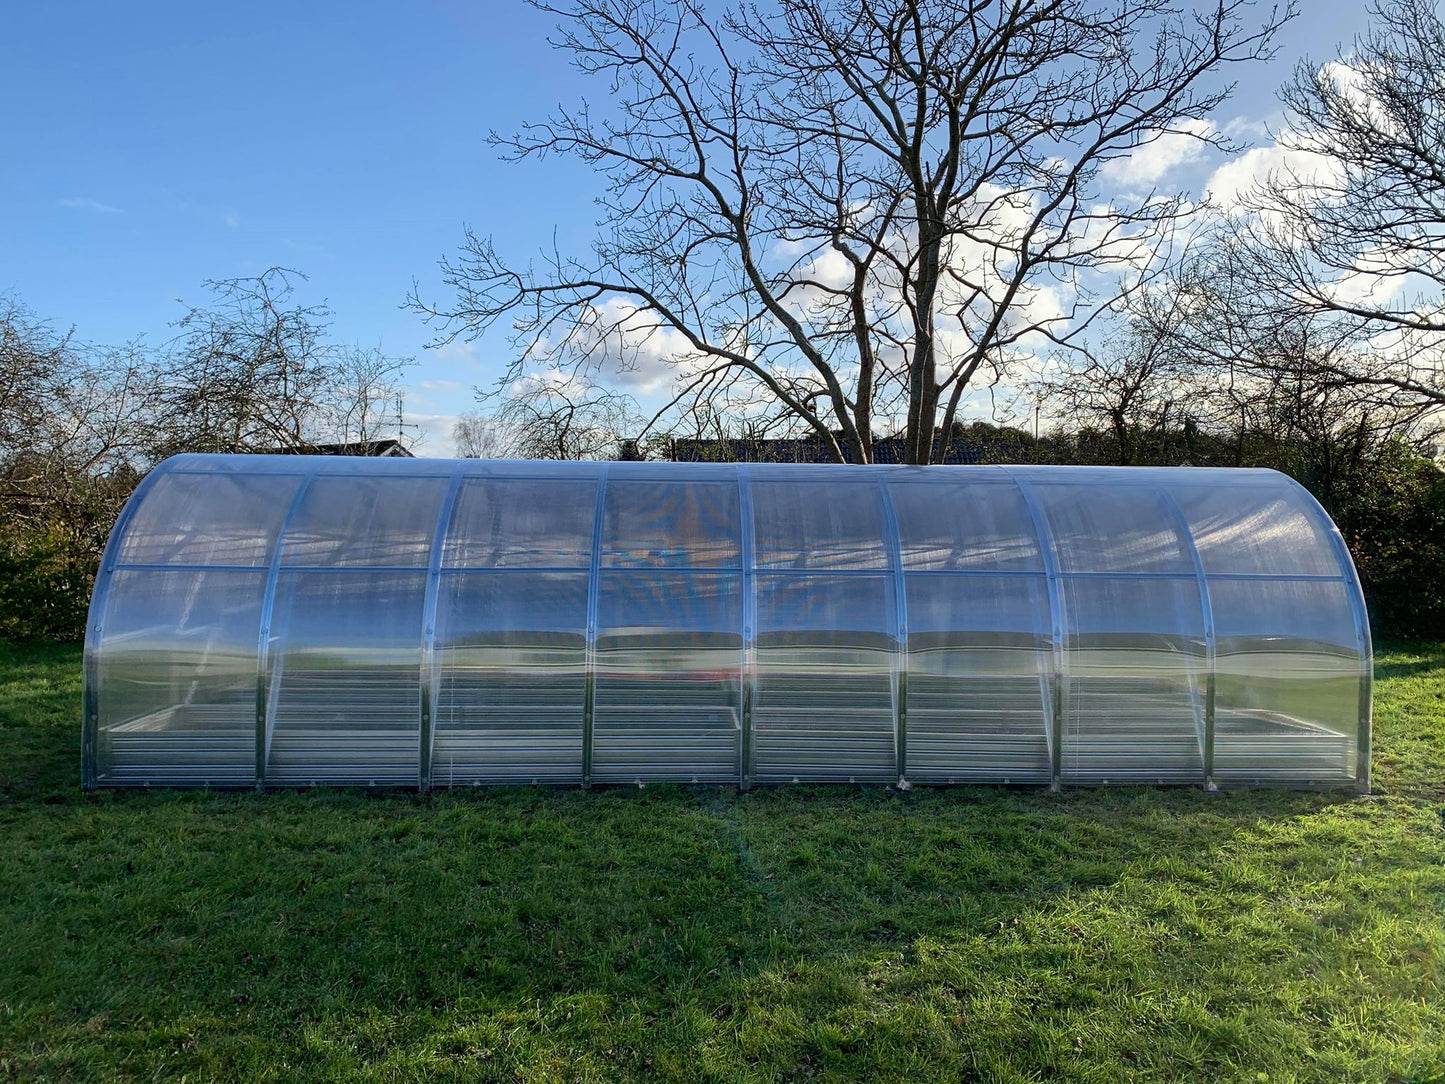 NEW 2021 GREENHOUSE STRONG 24 M² 3M X 8M (9.8FT X 26FT)